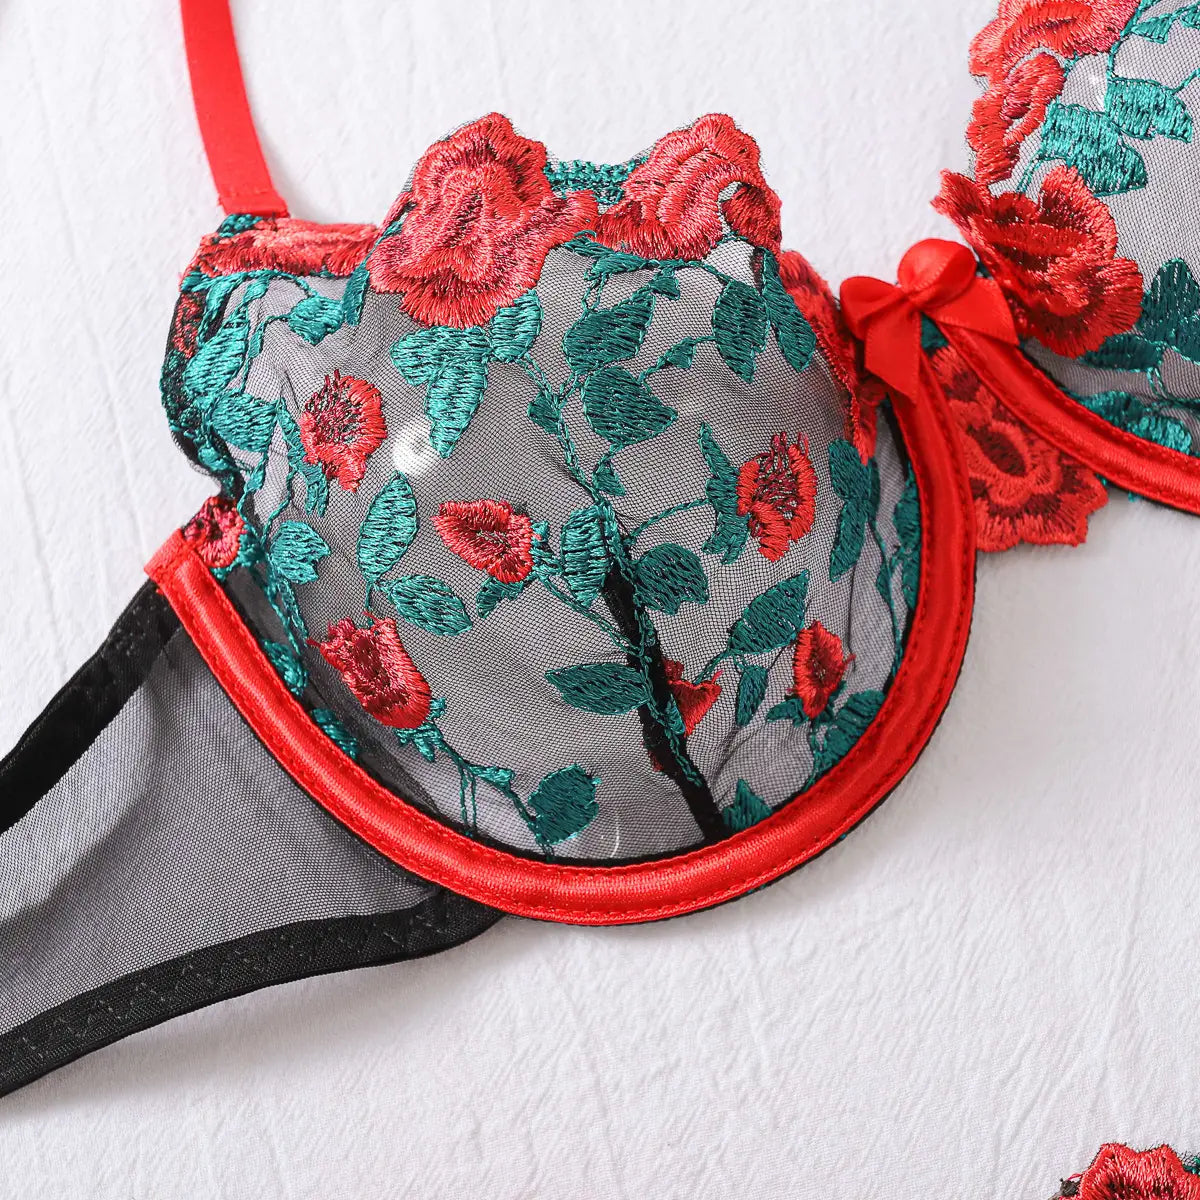 Sexy Floral Embroidered Lingerie Set – See-through Elegance